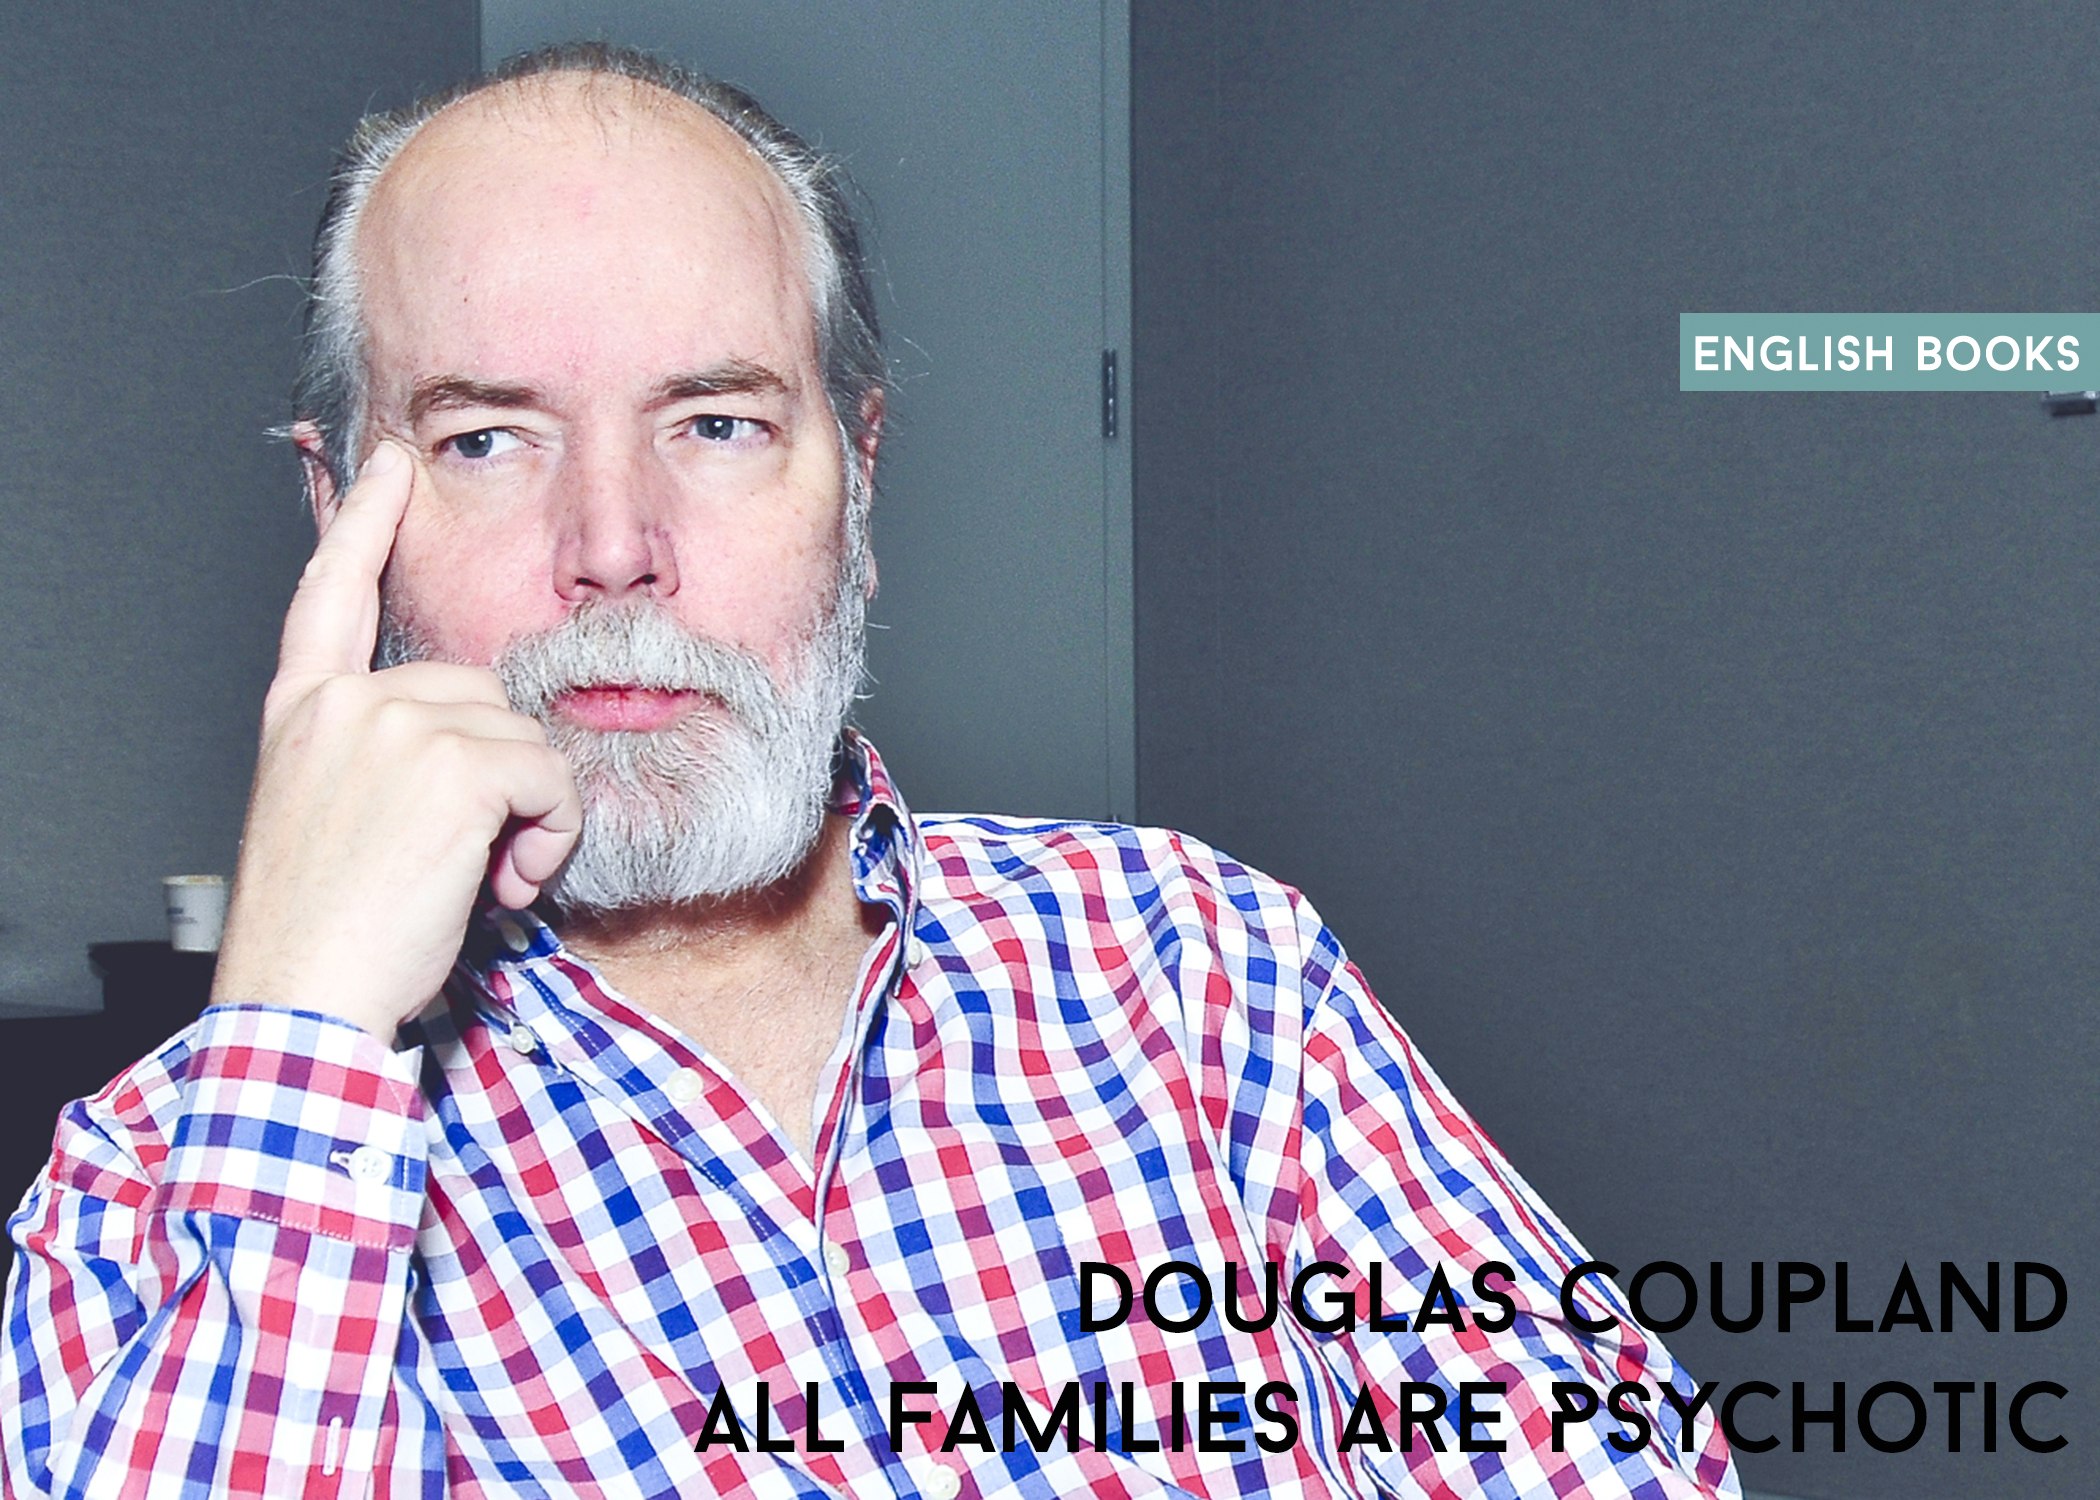 Douglas Coupland — All Families Are Psychotic